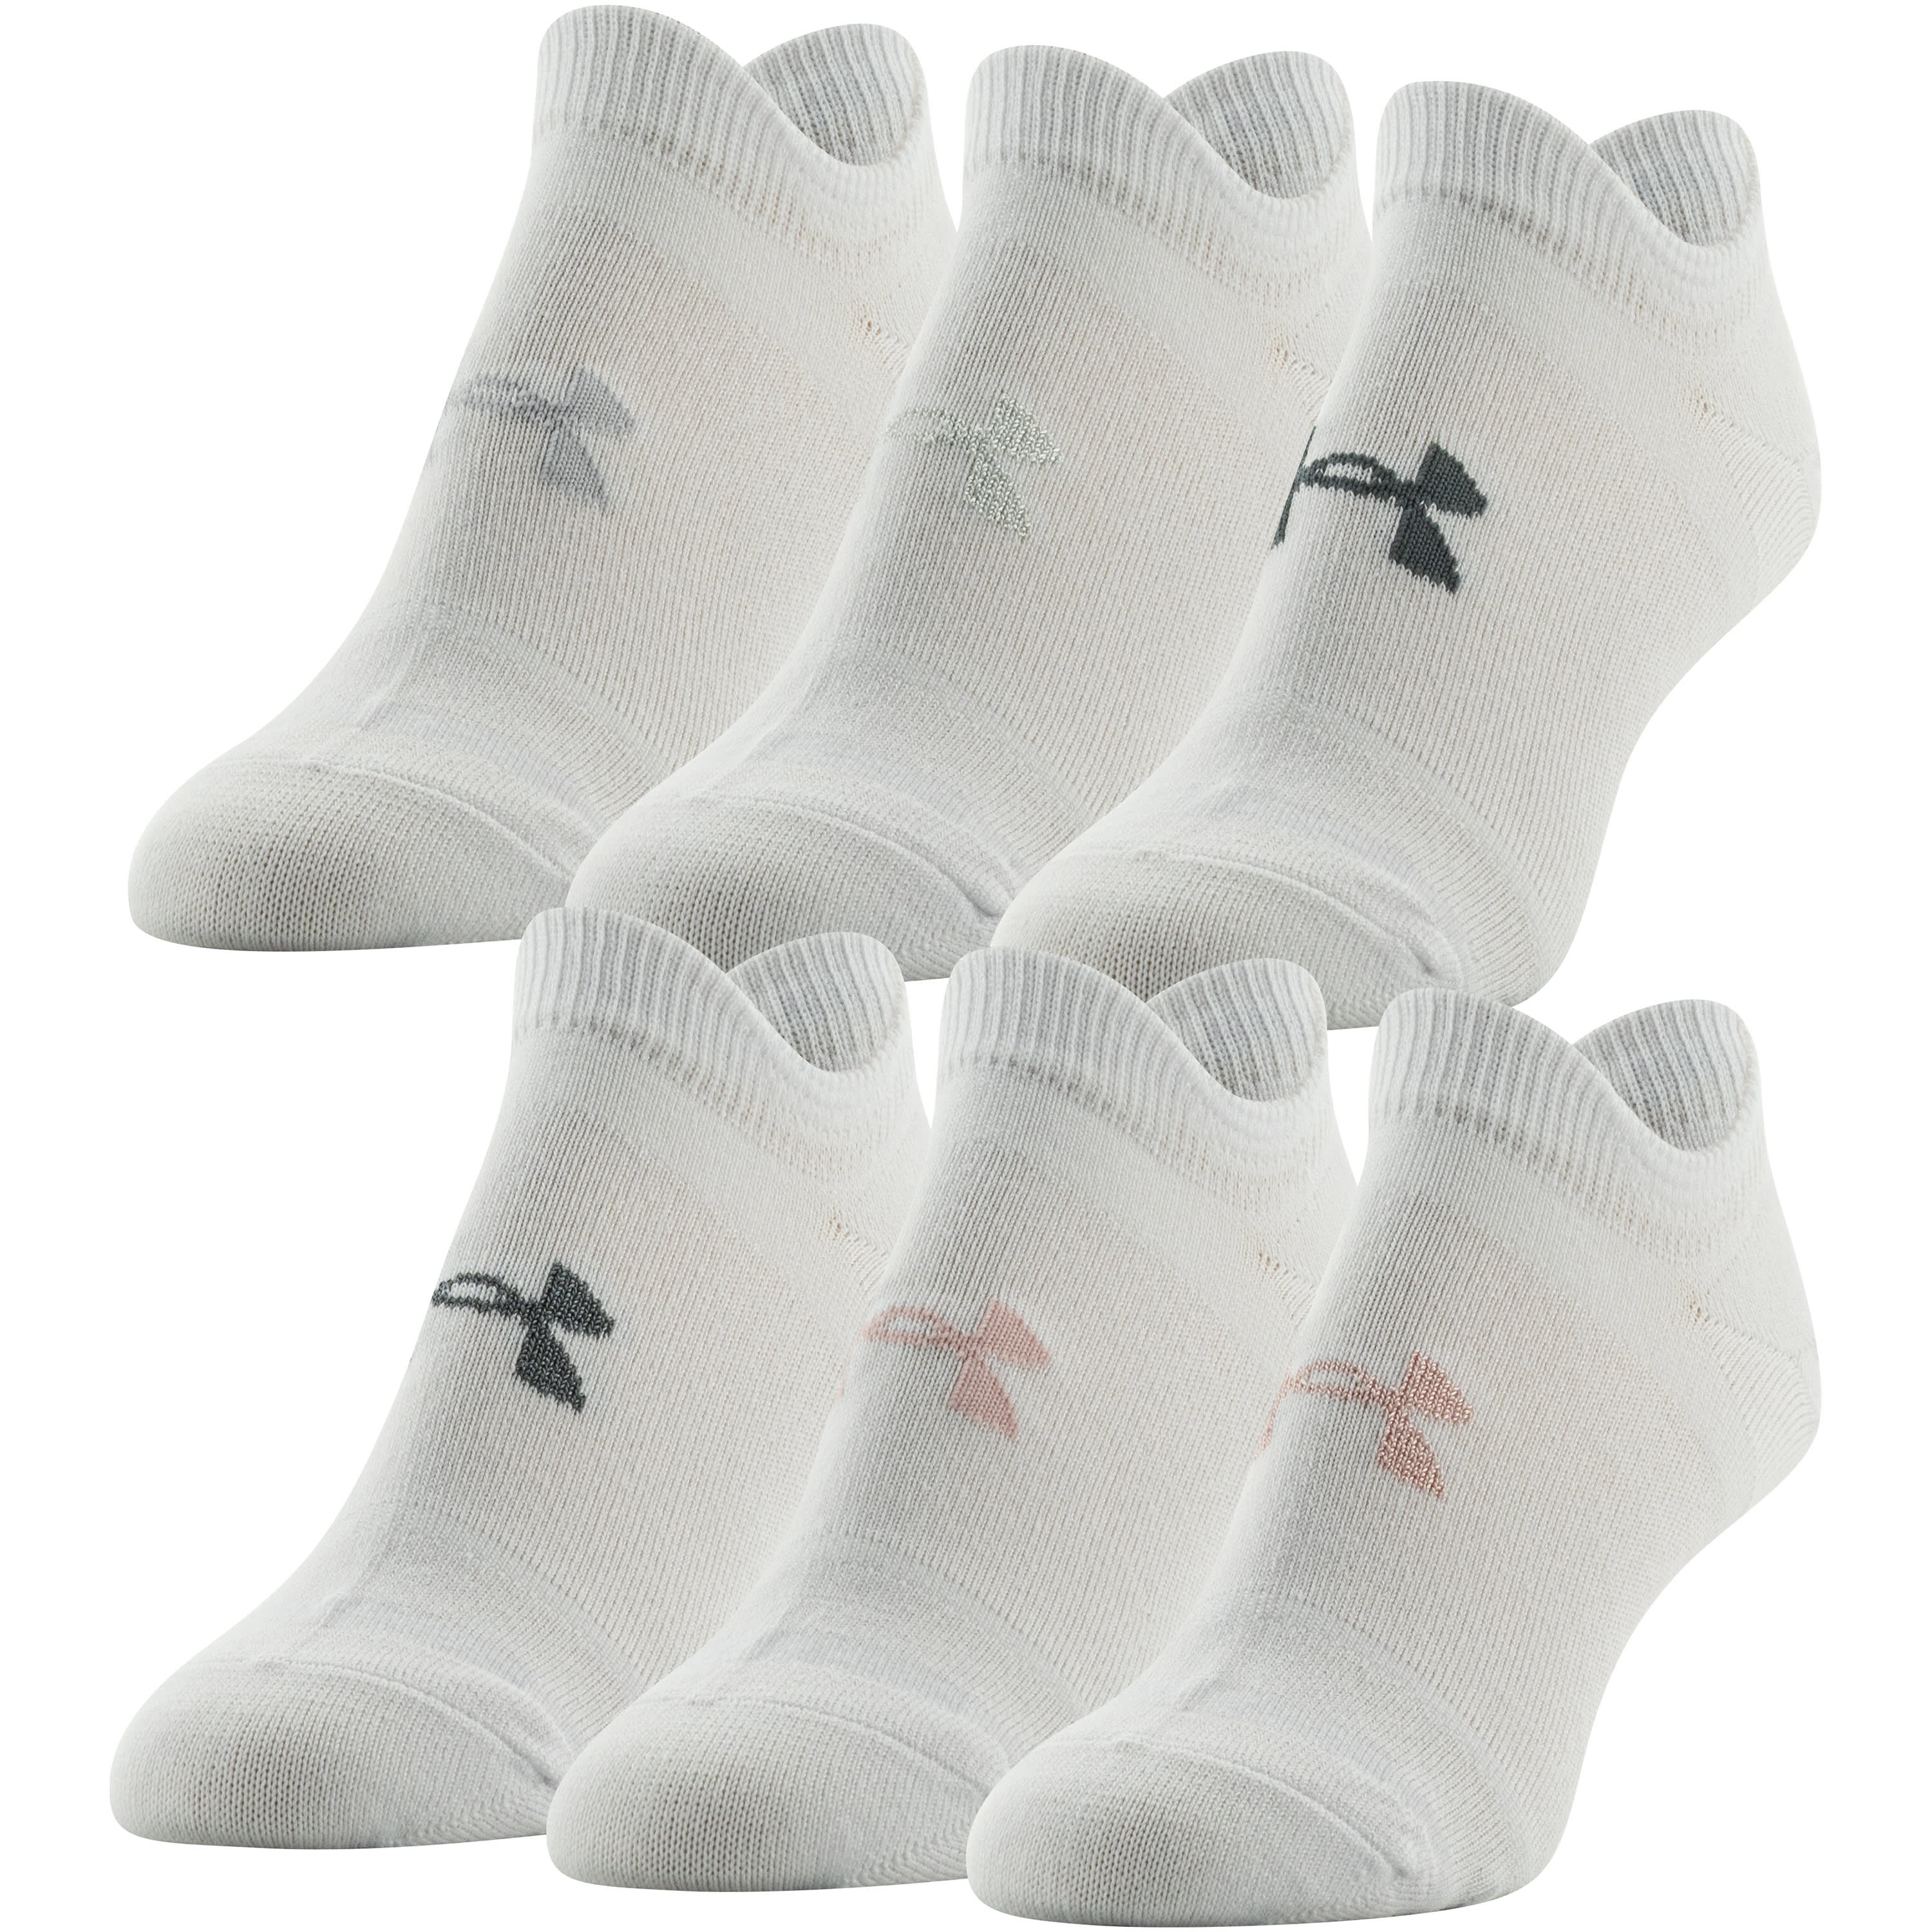 Under Armour® Women's No Show 6-Pack Socks